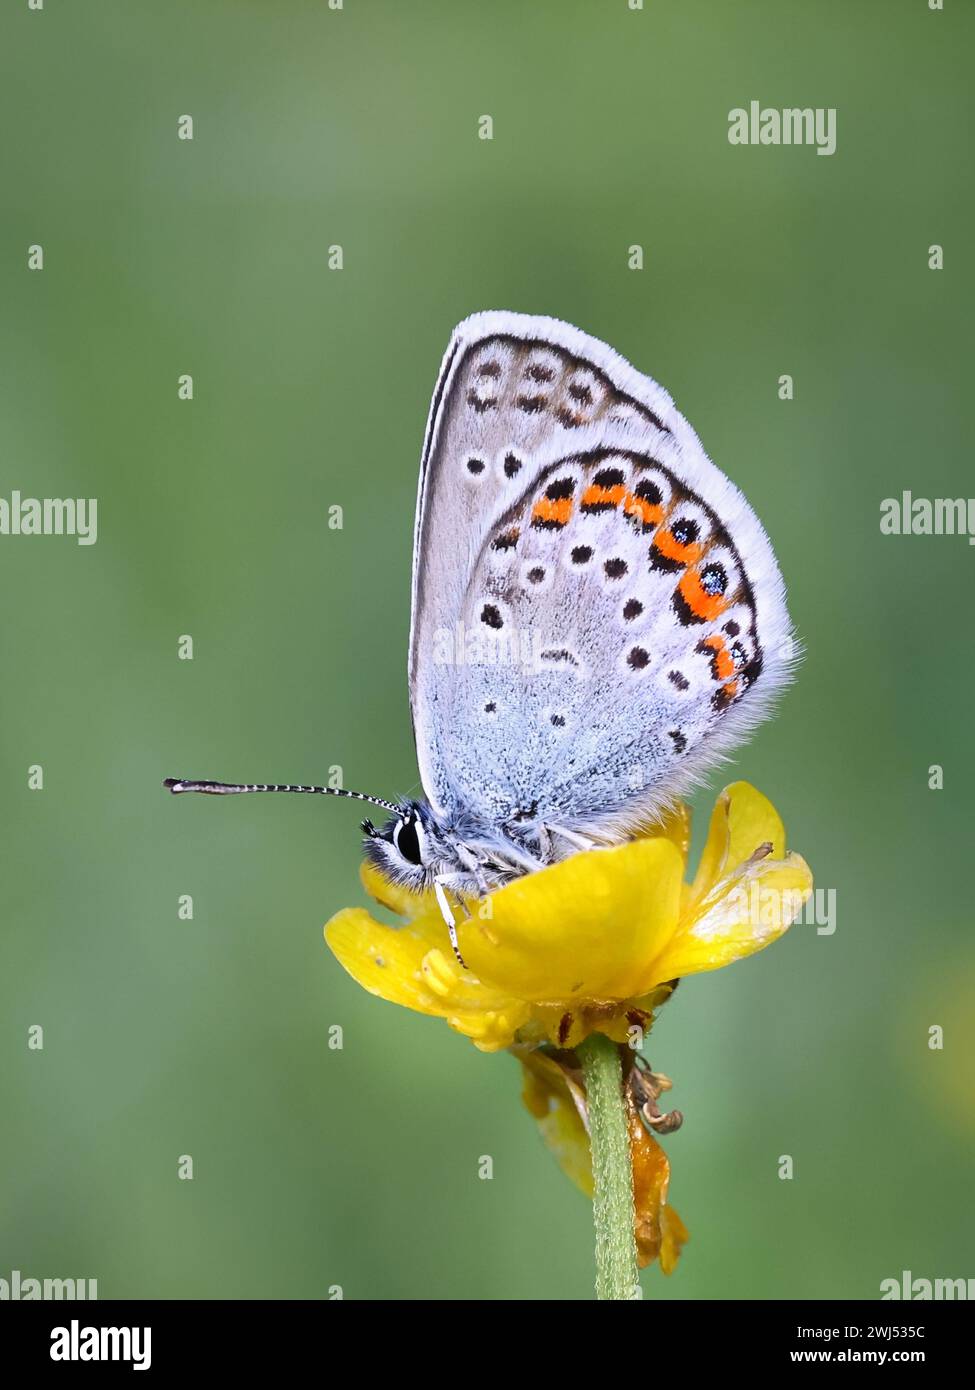 Northern Blue butterfly, known as Plebejus idas or Lycaeides idas, feeding on Meadow Buttercup in Finland Stock Photo